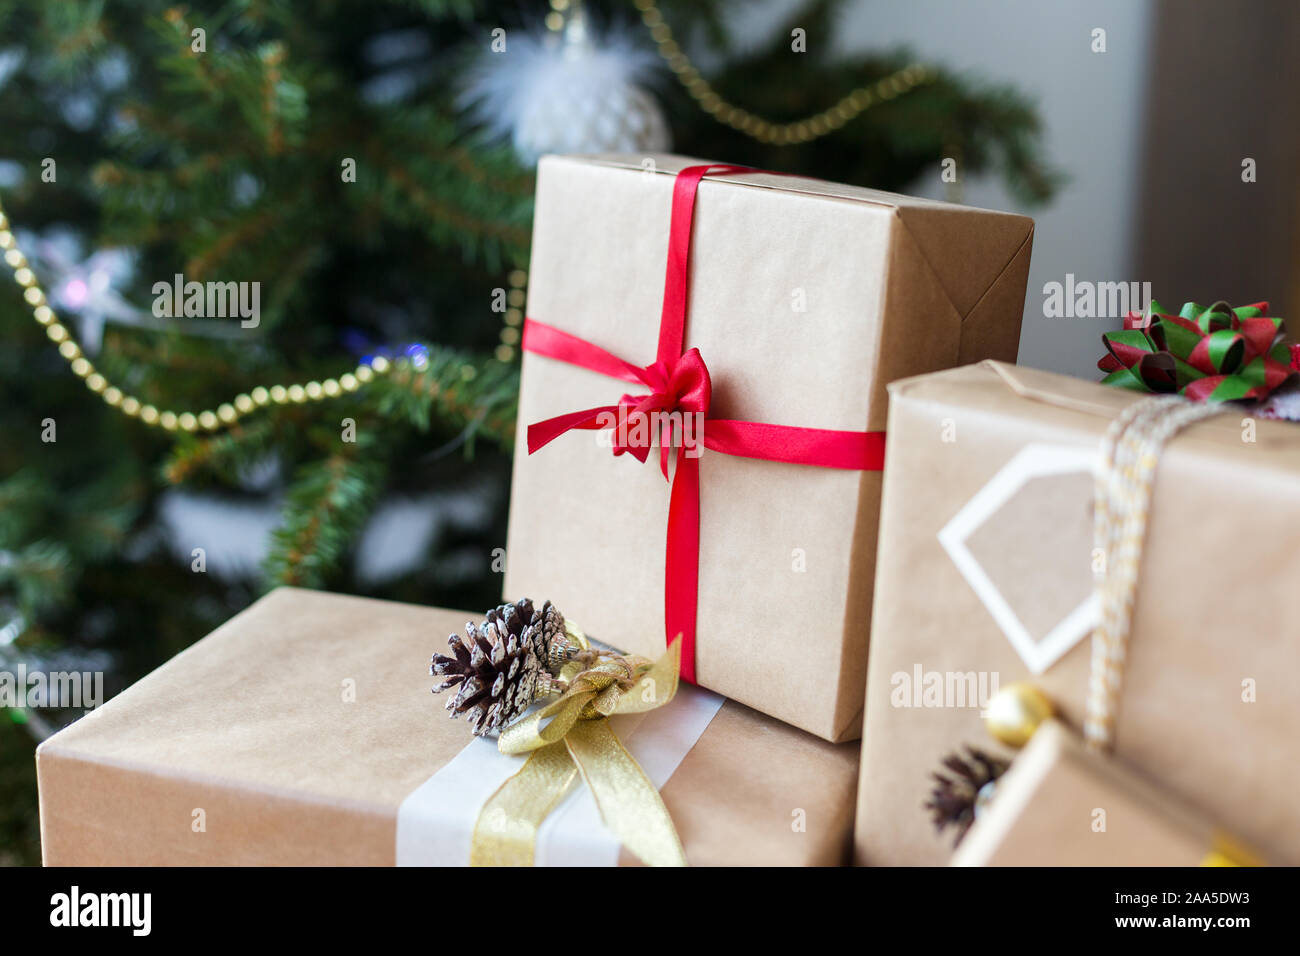 Gift boxes with christmas tree at background. Red, golden and white ribbons on craft present boxes. Festive Christmas tree on background Stock Photo